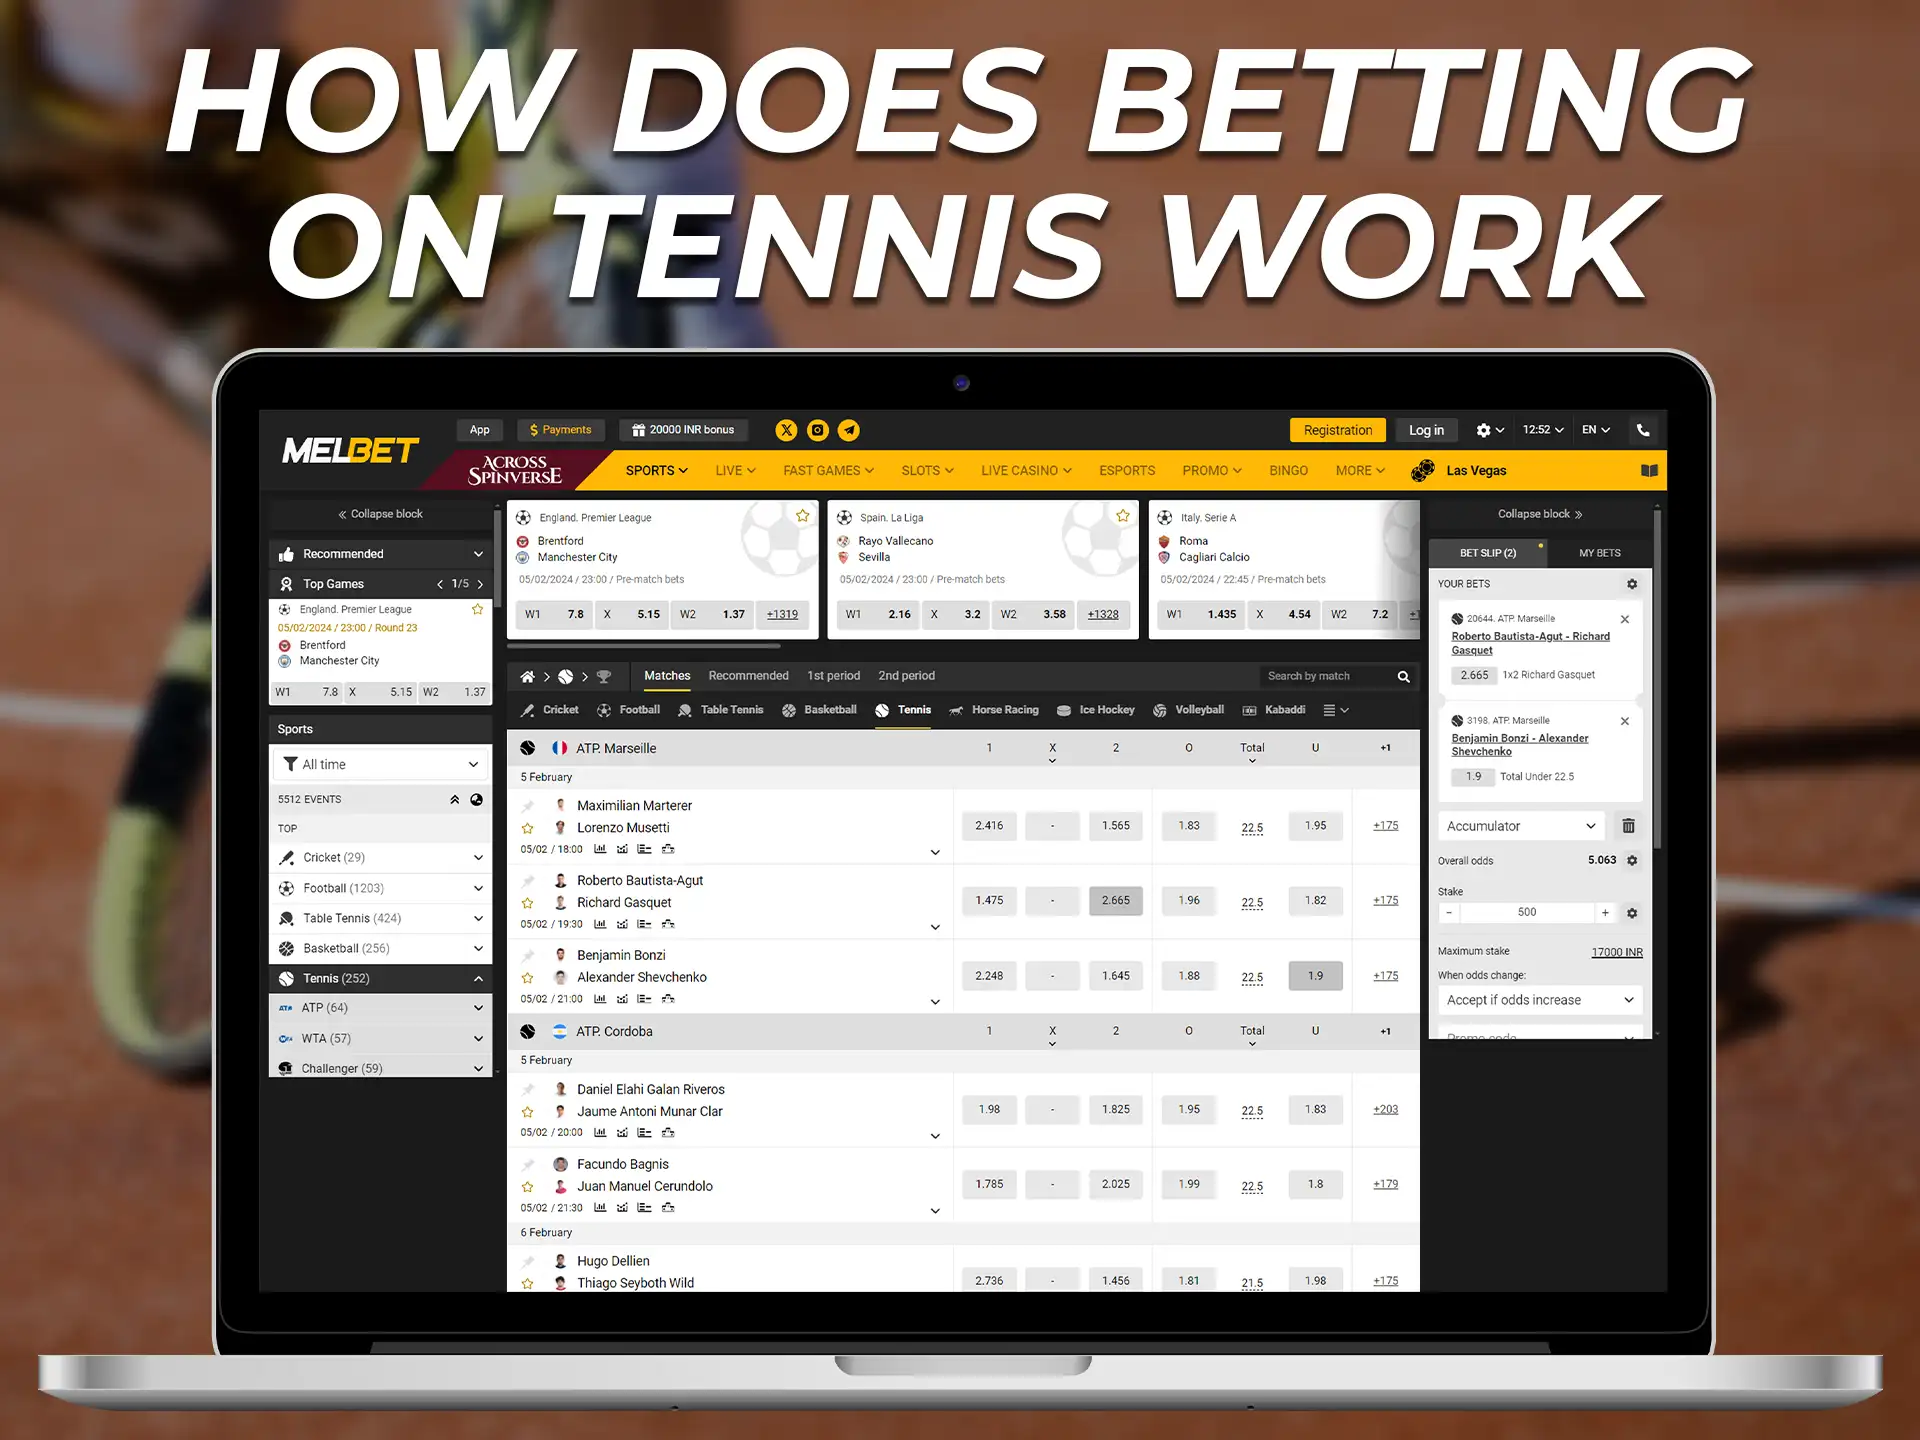 From our review you will learn how tennis betting works.